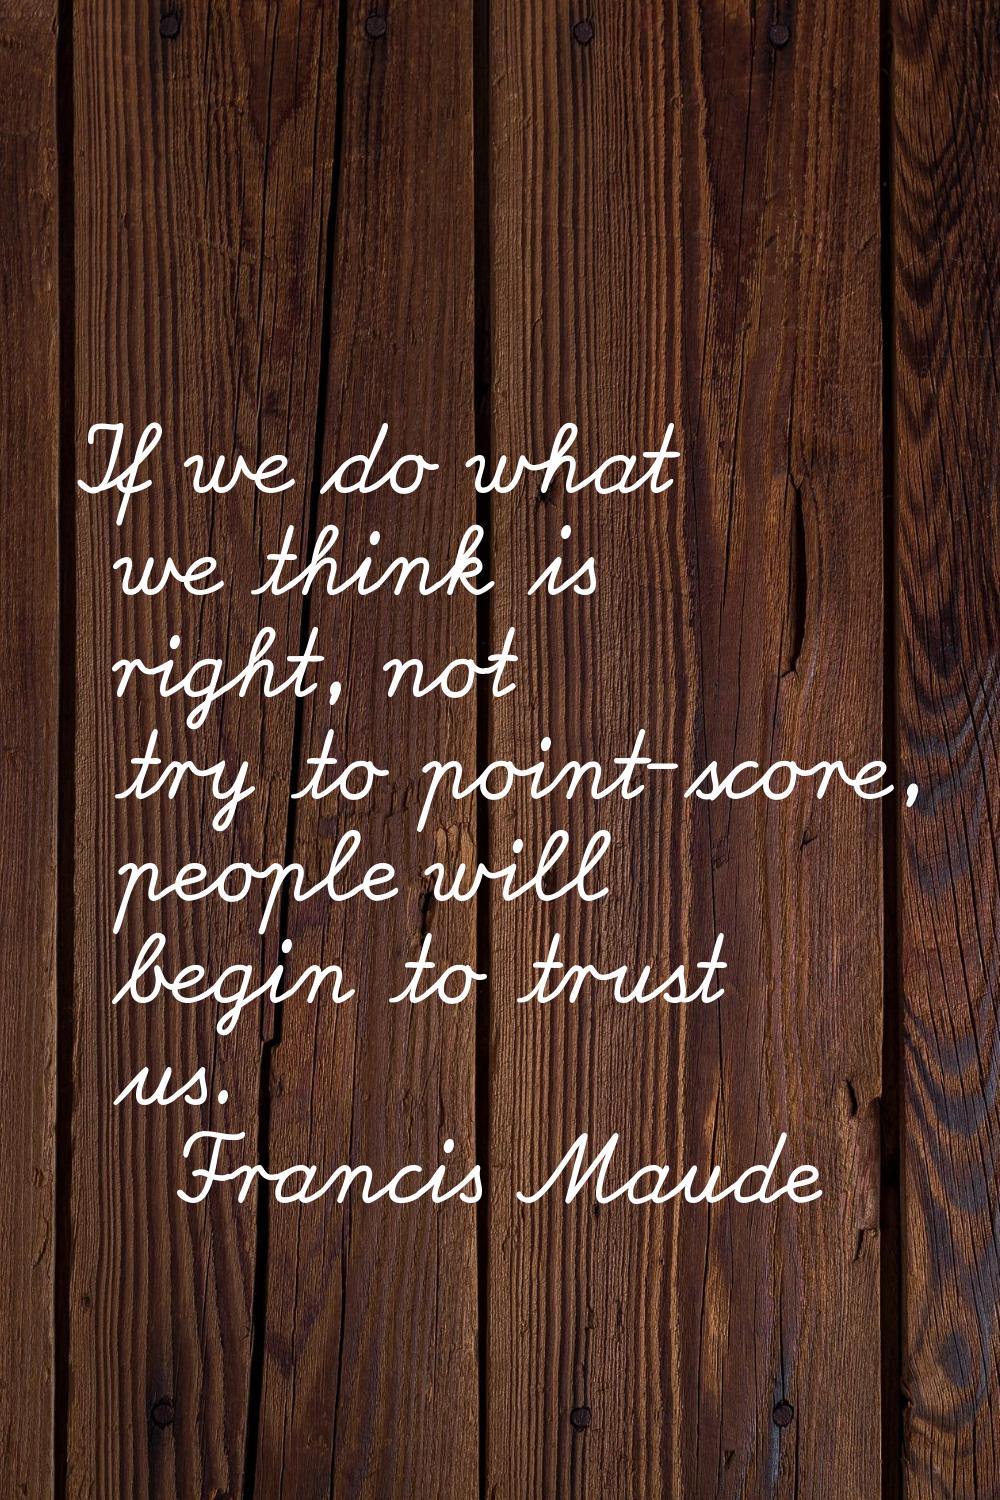 If we do what we think is right, not try to point-score, people will begin to trust us.